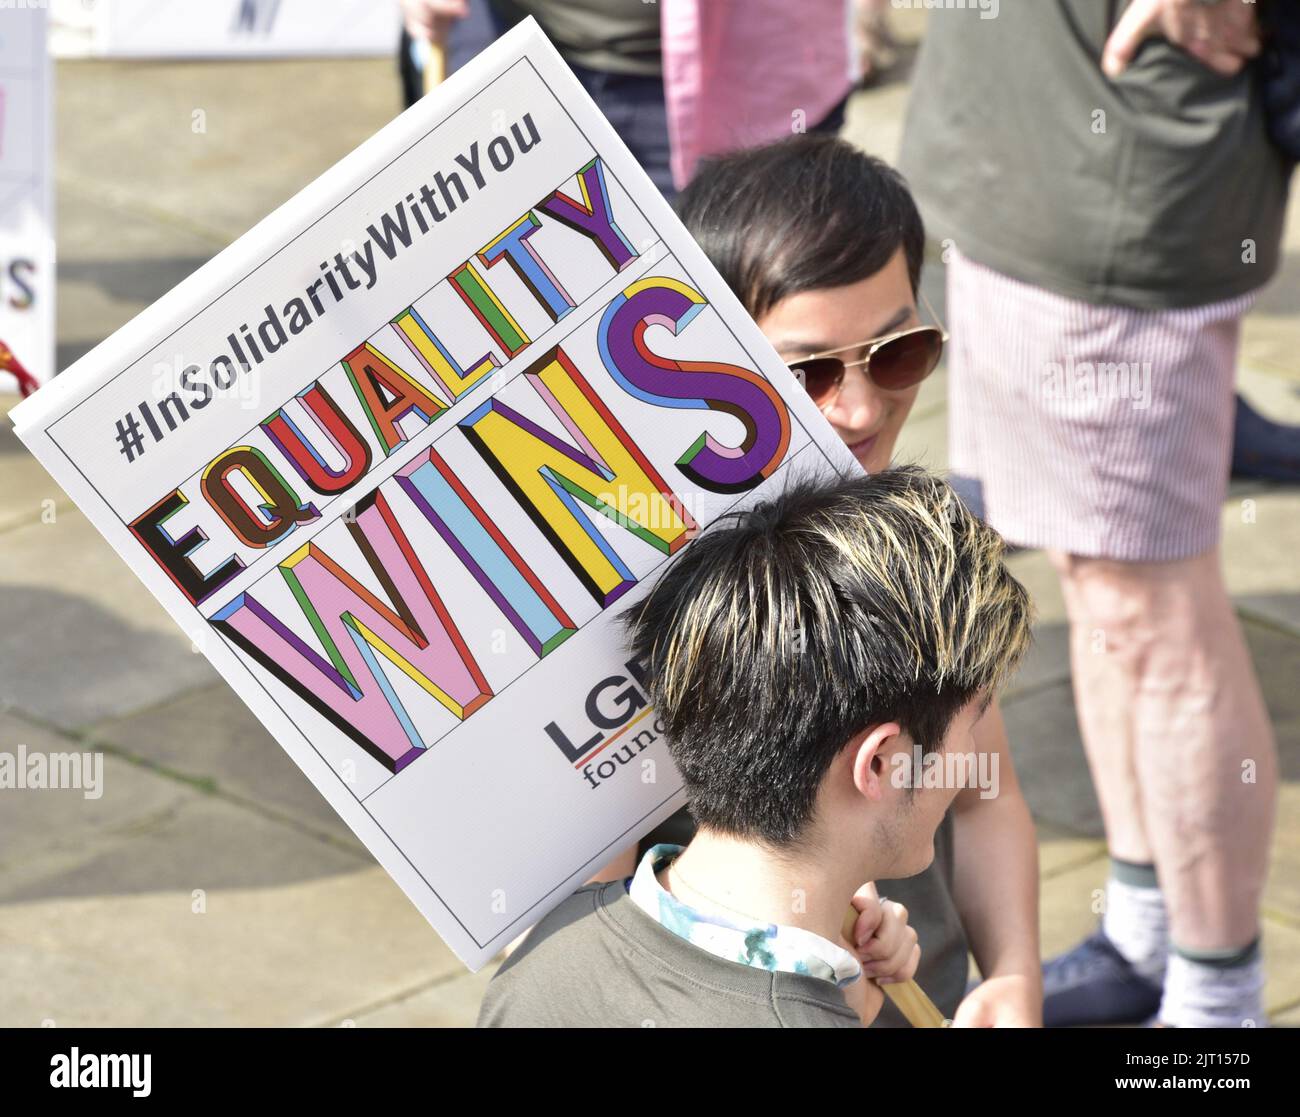 Manchester, UK. 27th August, 2022. A person carries an 'Equality Wins' placard. Participants get ready to take part in the LGBTQ+ Pride parade, central Manchester, UK, as LGBTQ+ Pride continues over the Bank Holiday weekend 26th to 29th August. Organisers say: 'Manchester Pride is one of the UK's leading LGBTQ+ charities. Our vision is a world where LGBTQ+ people are free to live and love without prejudice. We’re part of a global Pride movement celebrating LGBTQ+ equality and challenging discrimination.' Credit: Terry Waller/Alamy Live News Stock Photo